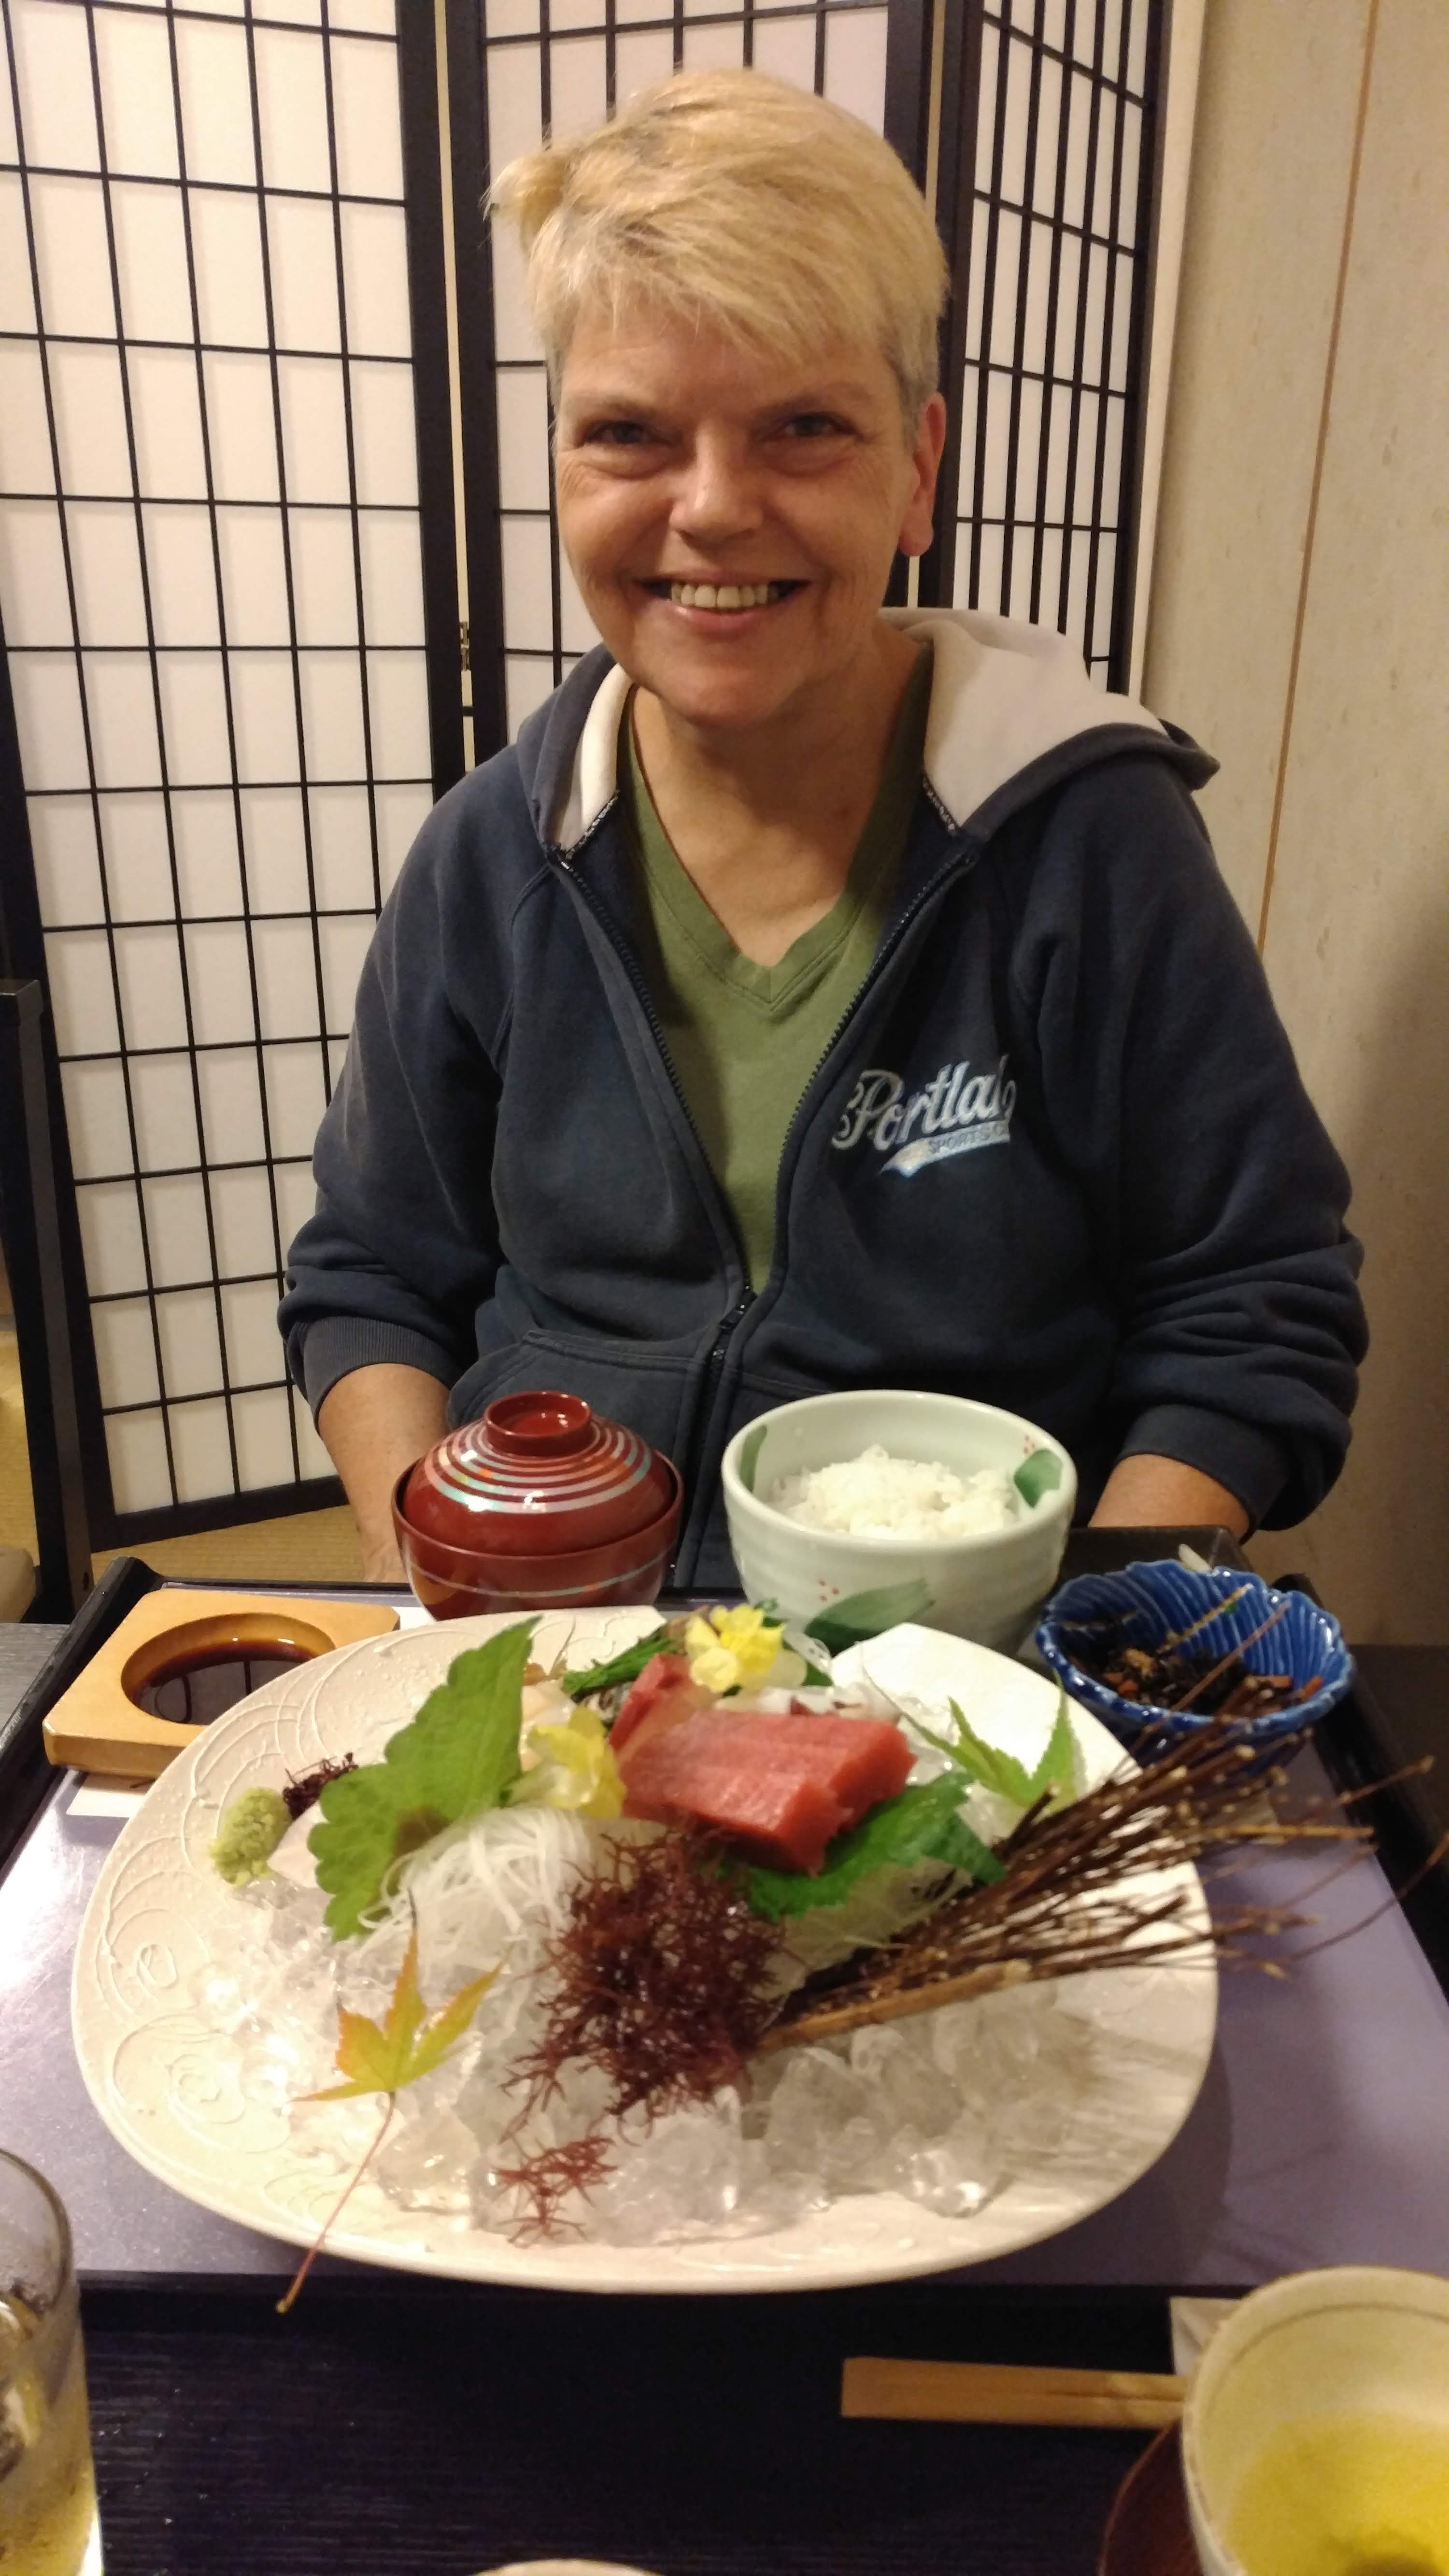 Brenda smailes with her plate of tuna, noodles, and side dishes